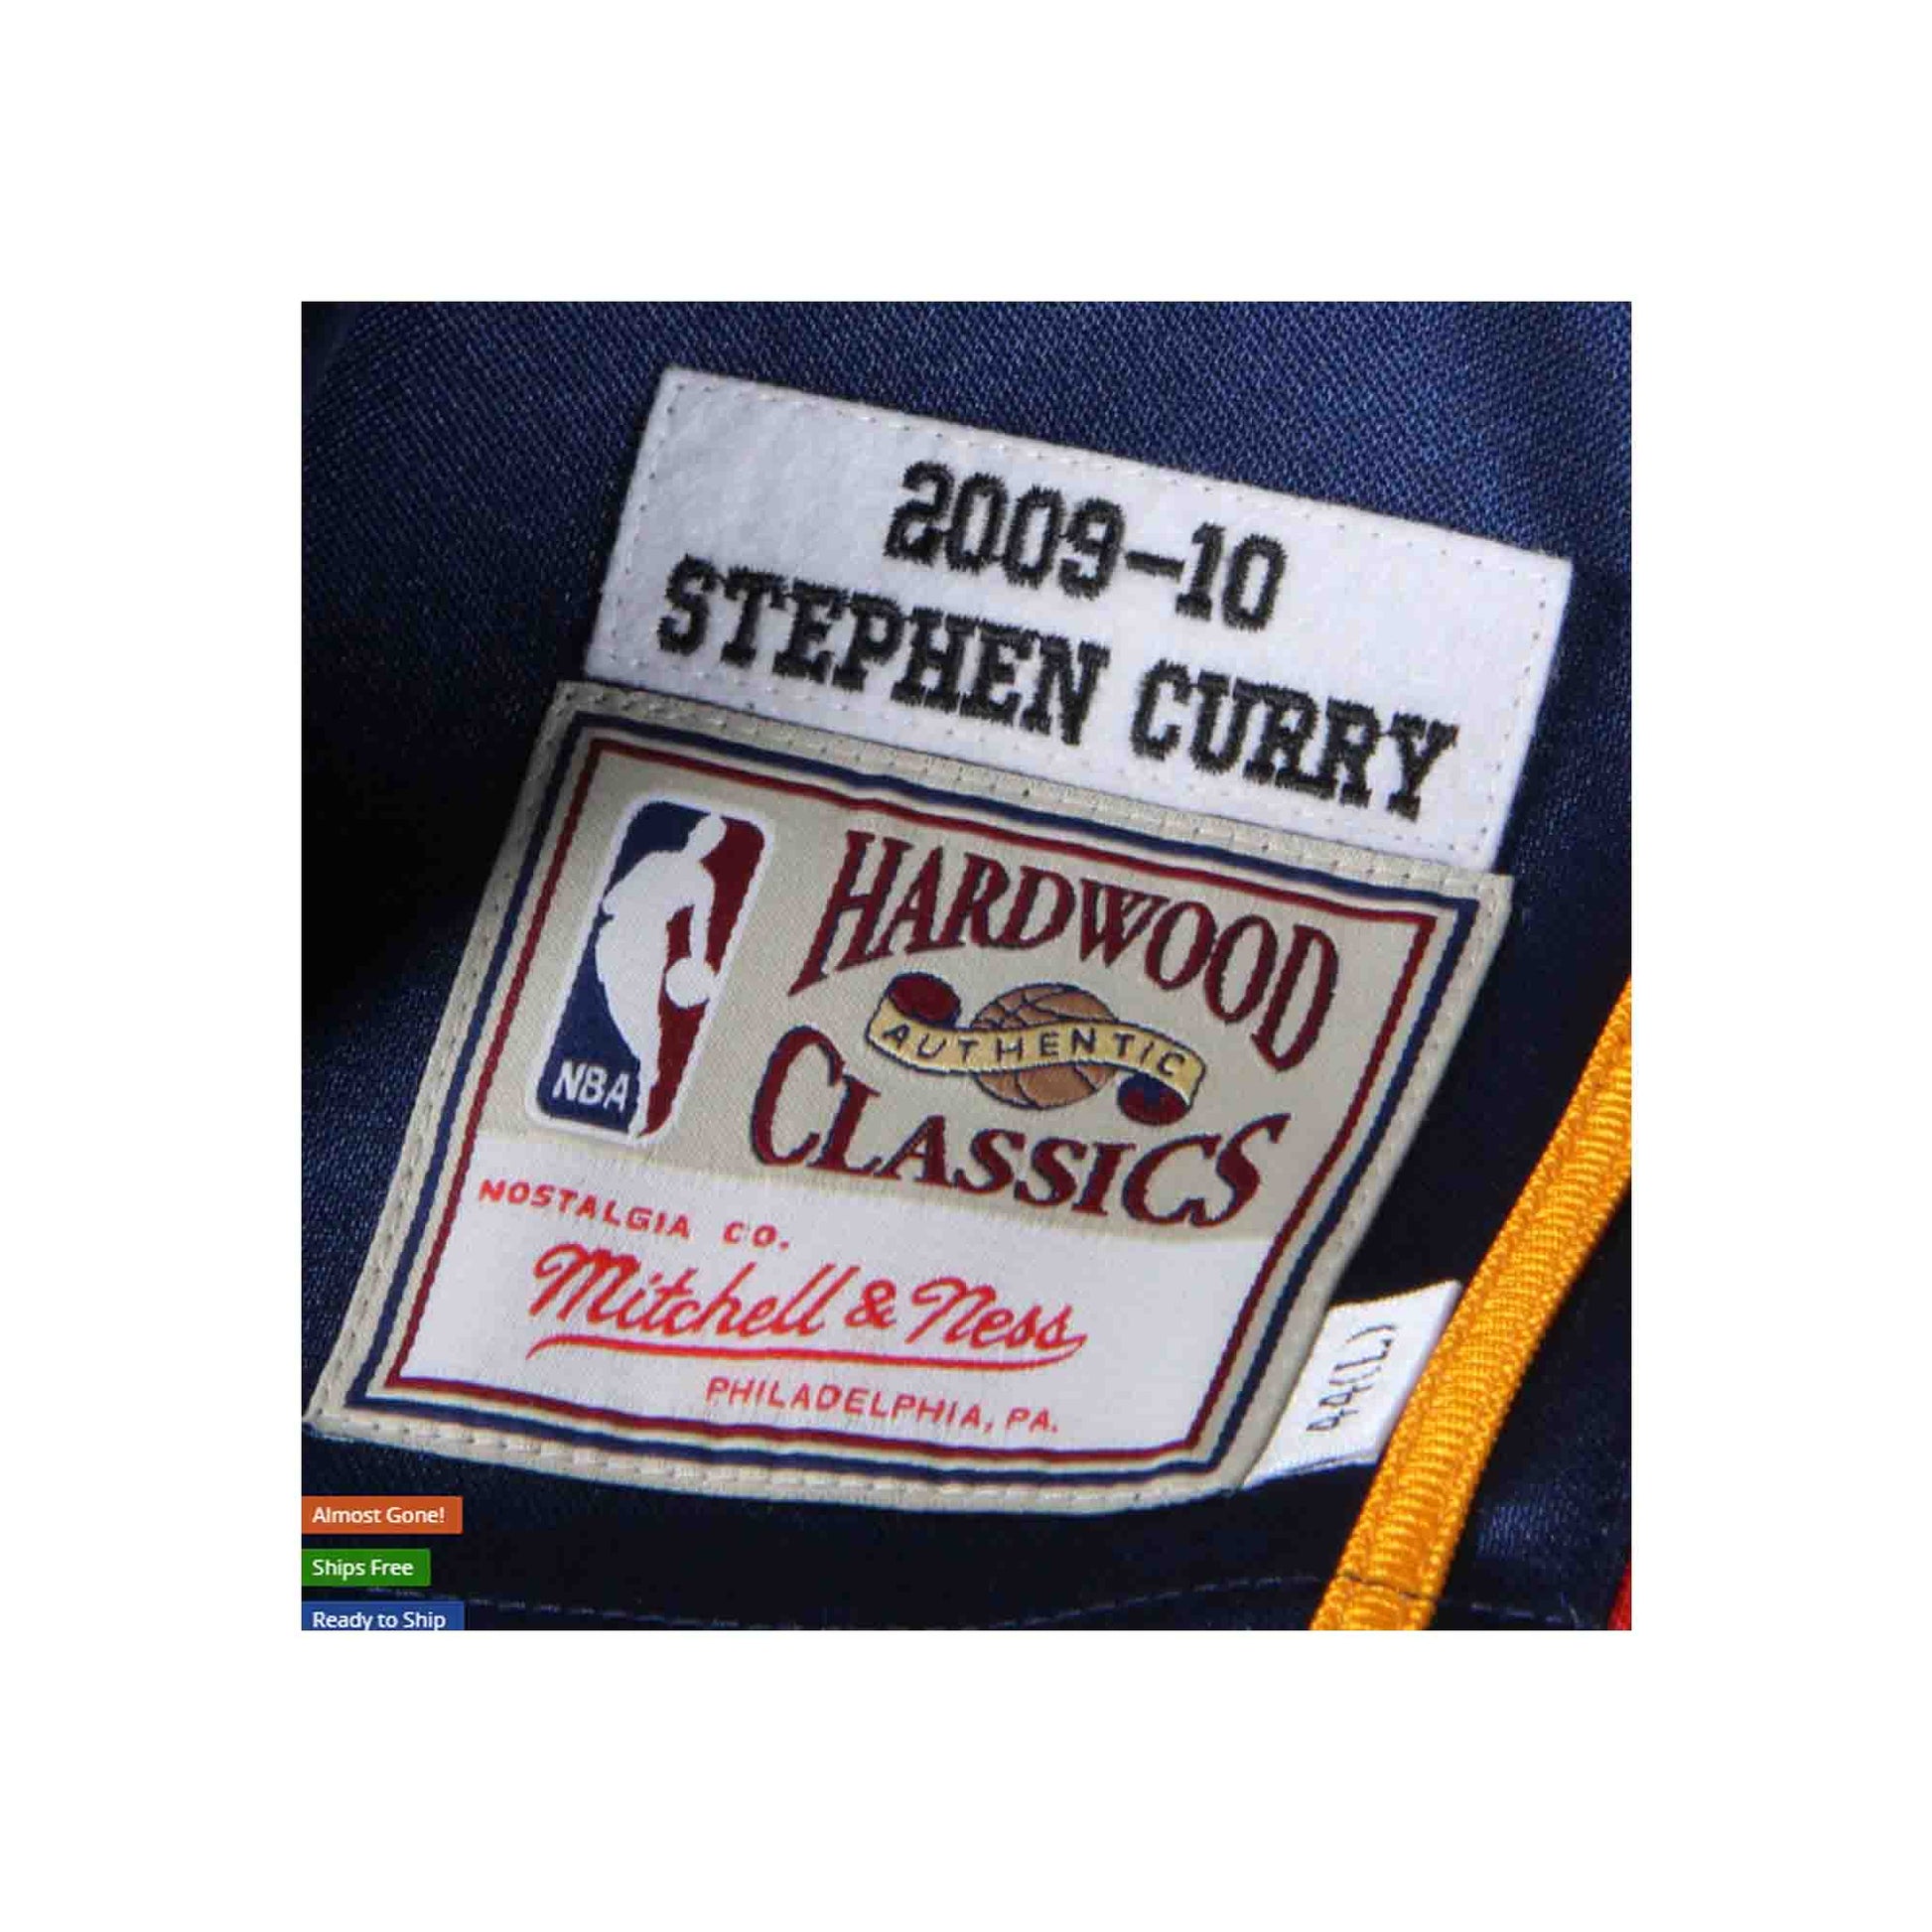 Stephen Curry 2009-10 Authentic Jersey Golden State Warriors